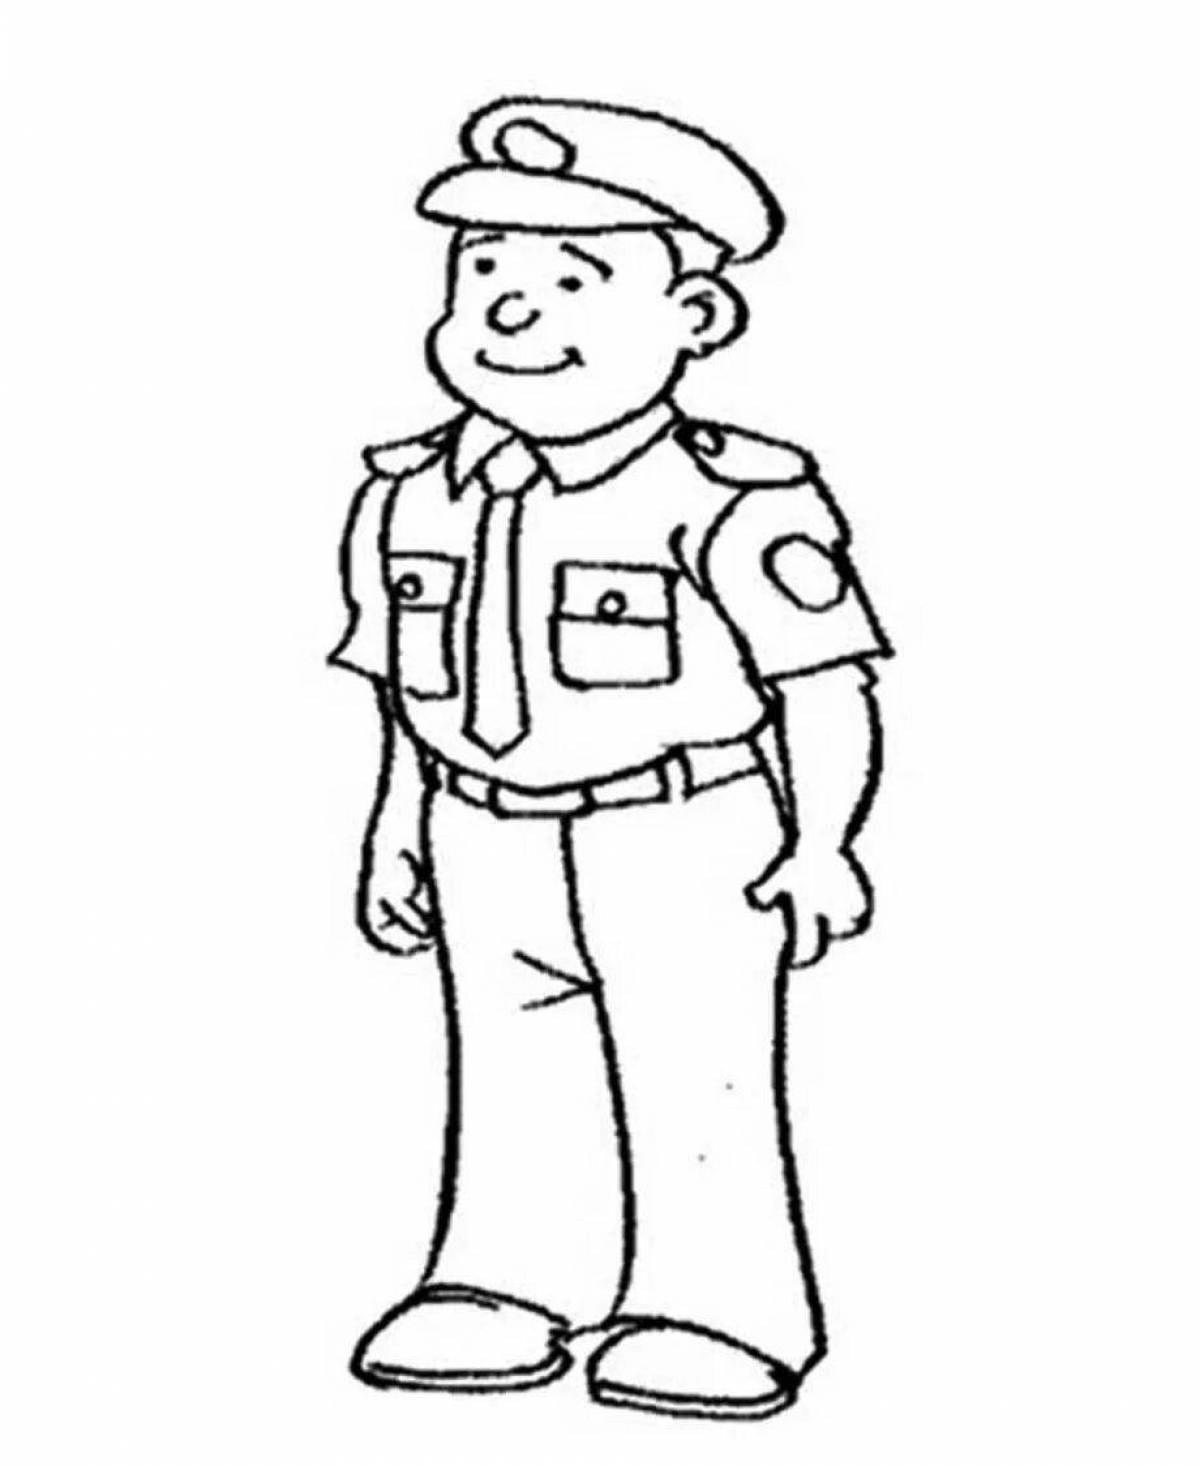 Great coloring police figurine